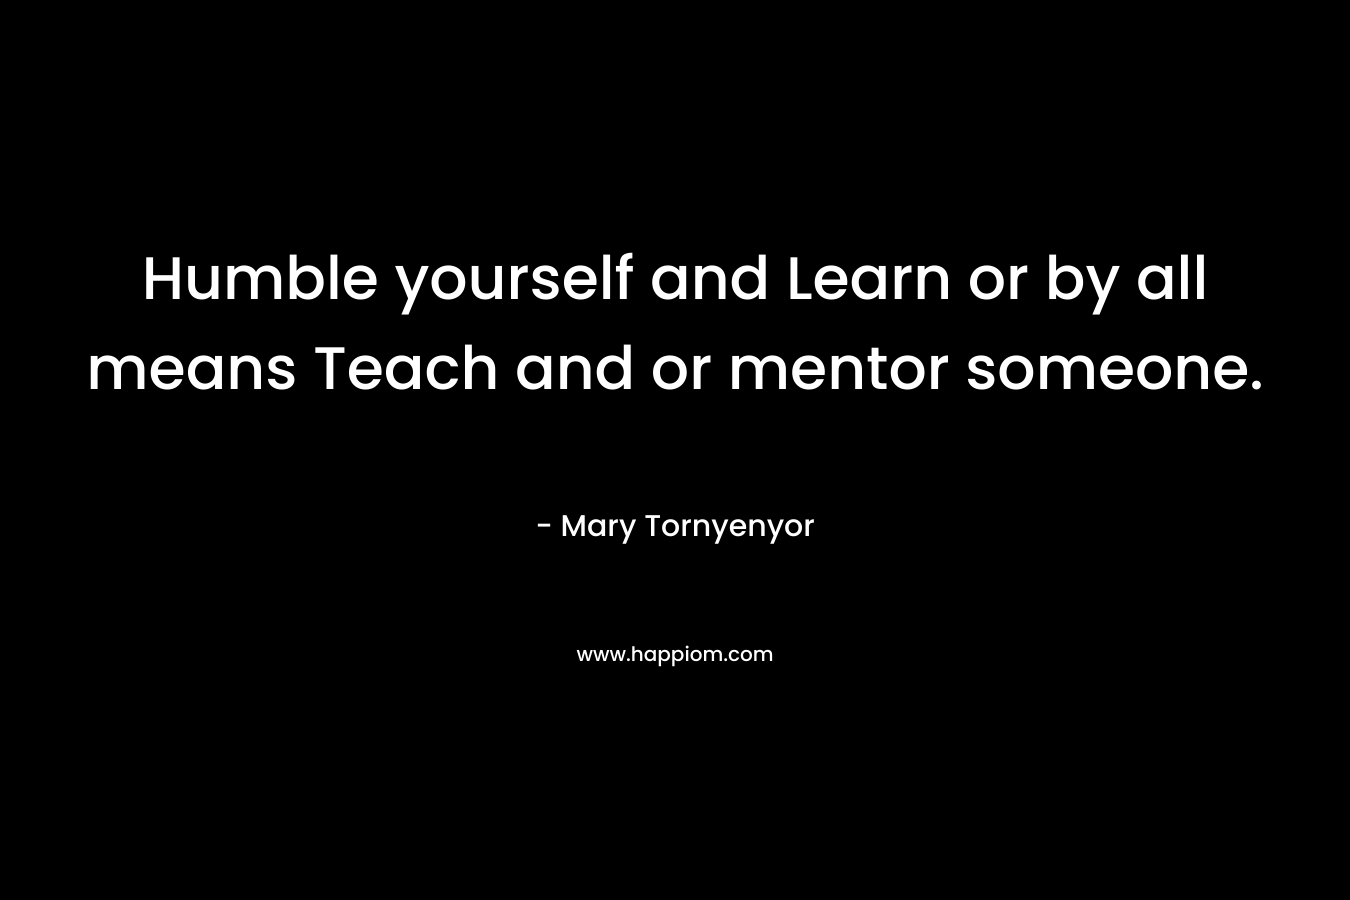 Humble yourself and Learn or by all means Teach and or mentor someone.